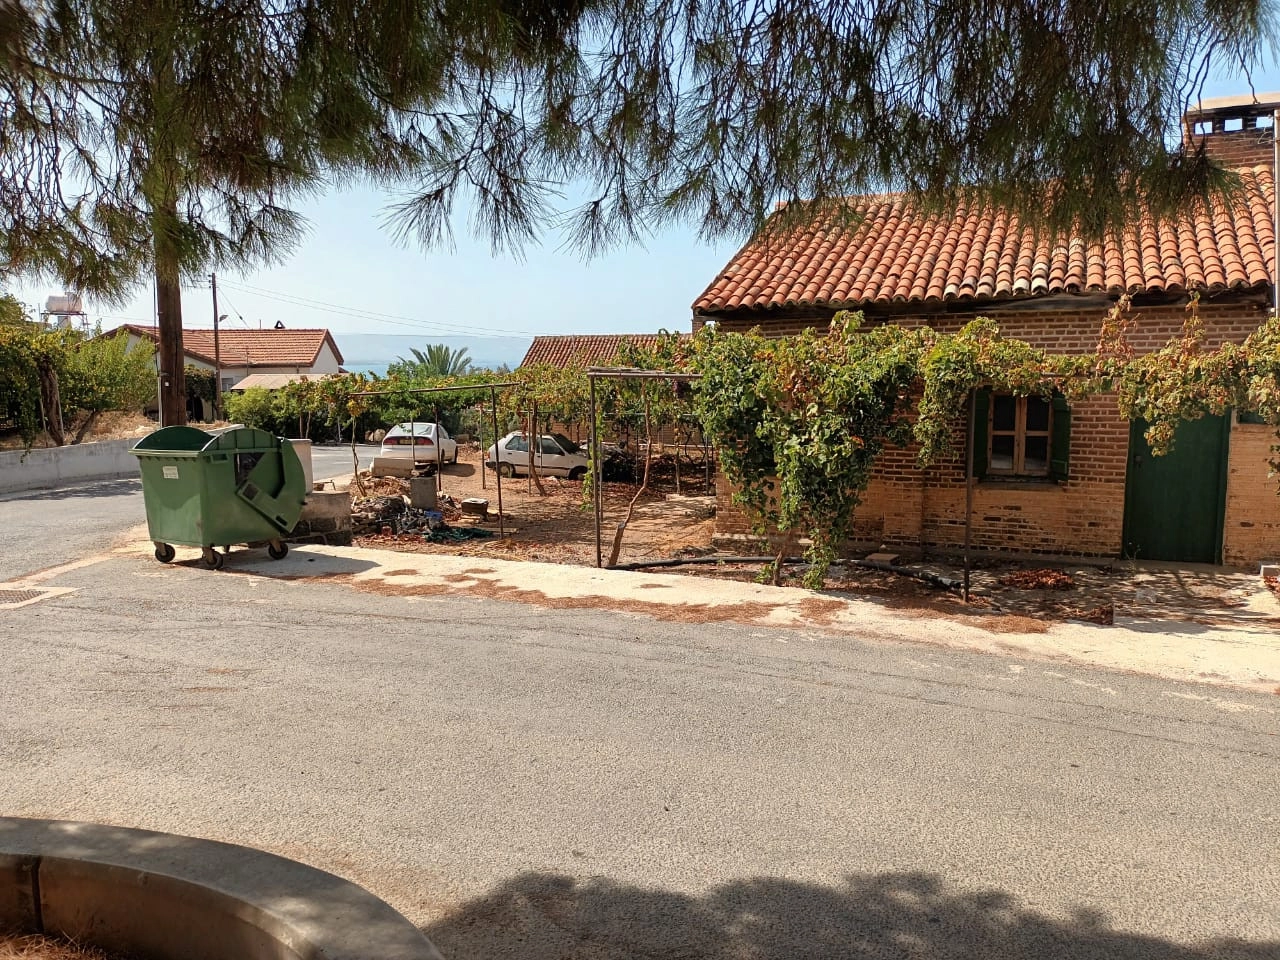 4 Bedroom House for Sale in Nea Dimmata, Paphos District